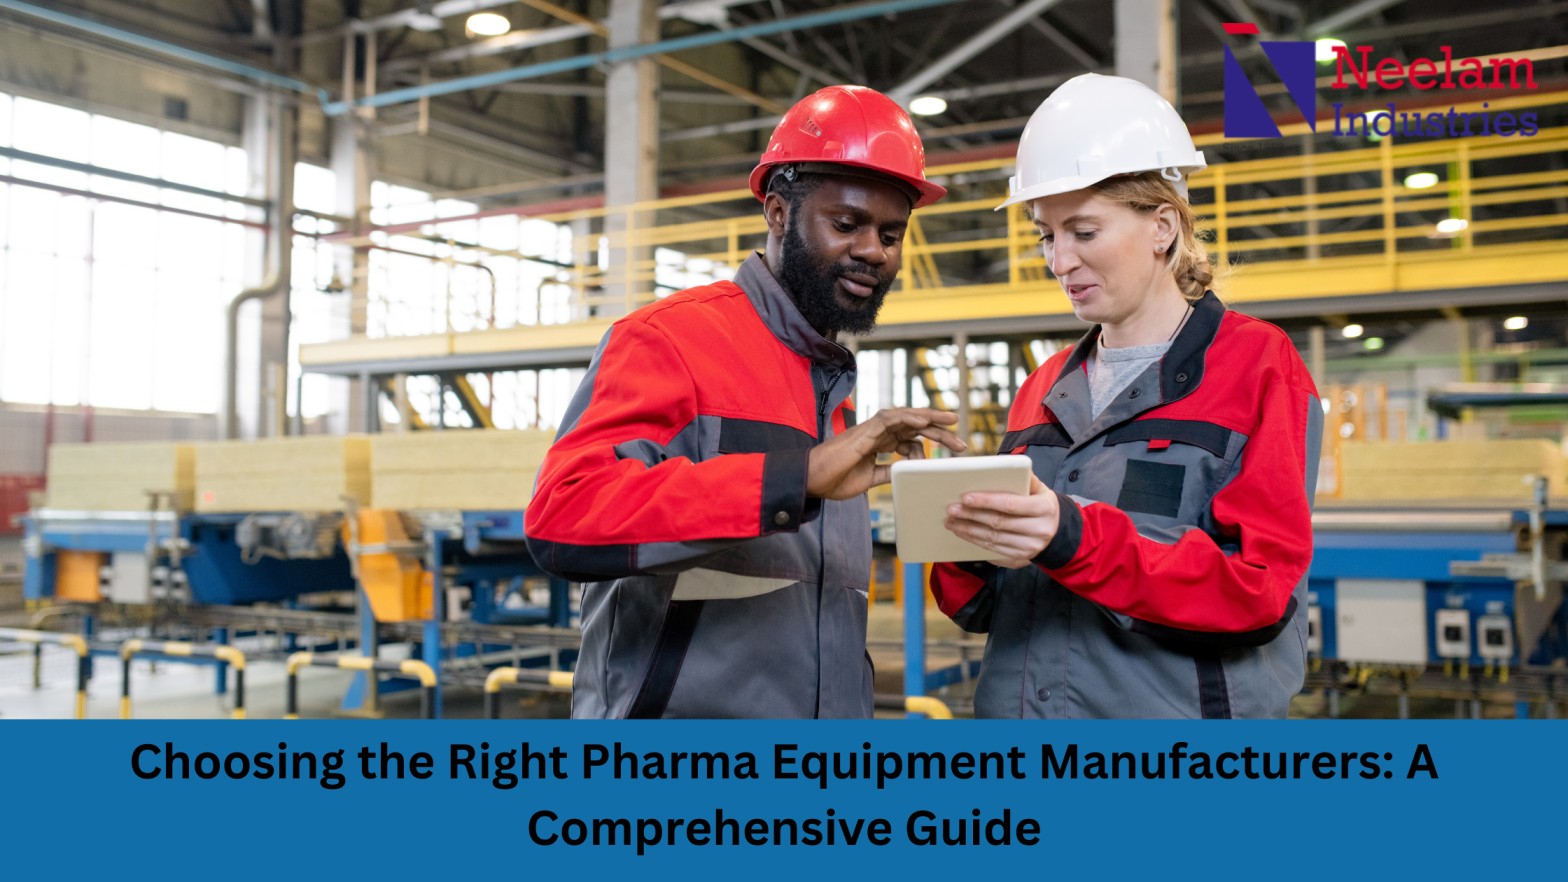 Choosing the Right Pharma Equipment Manufacturers: A Comprehensive Guide